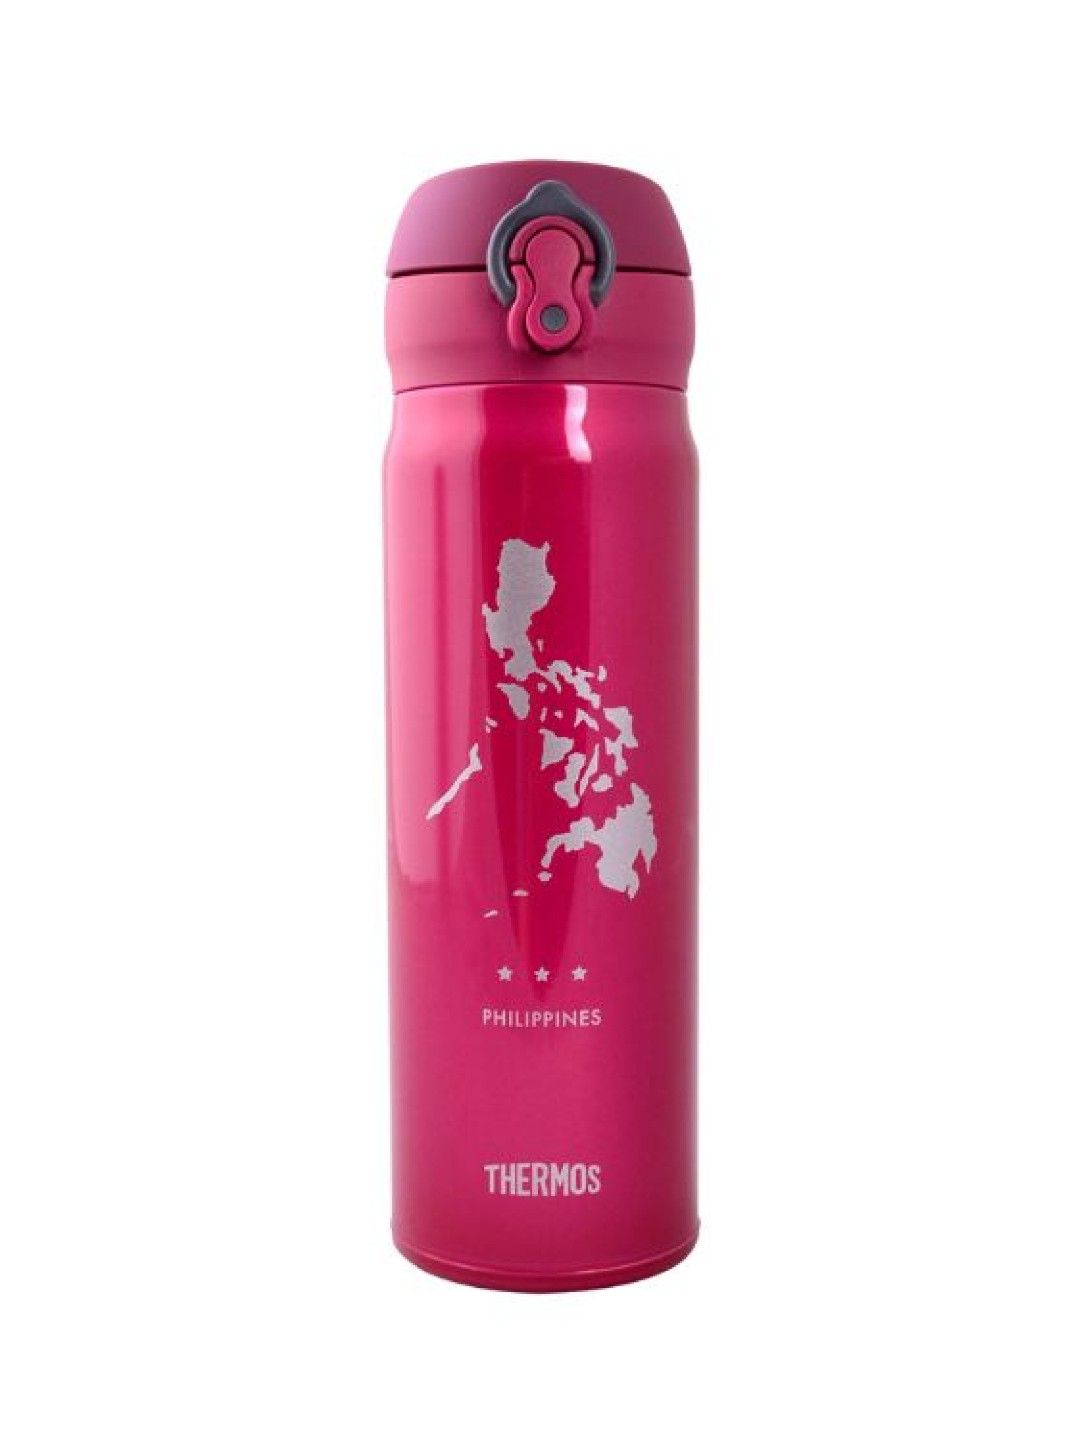 Thermos JNL-502P Insulated Drinking One Push Tumbler - Philippine Map/Great Red (500ml)